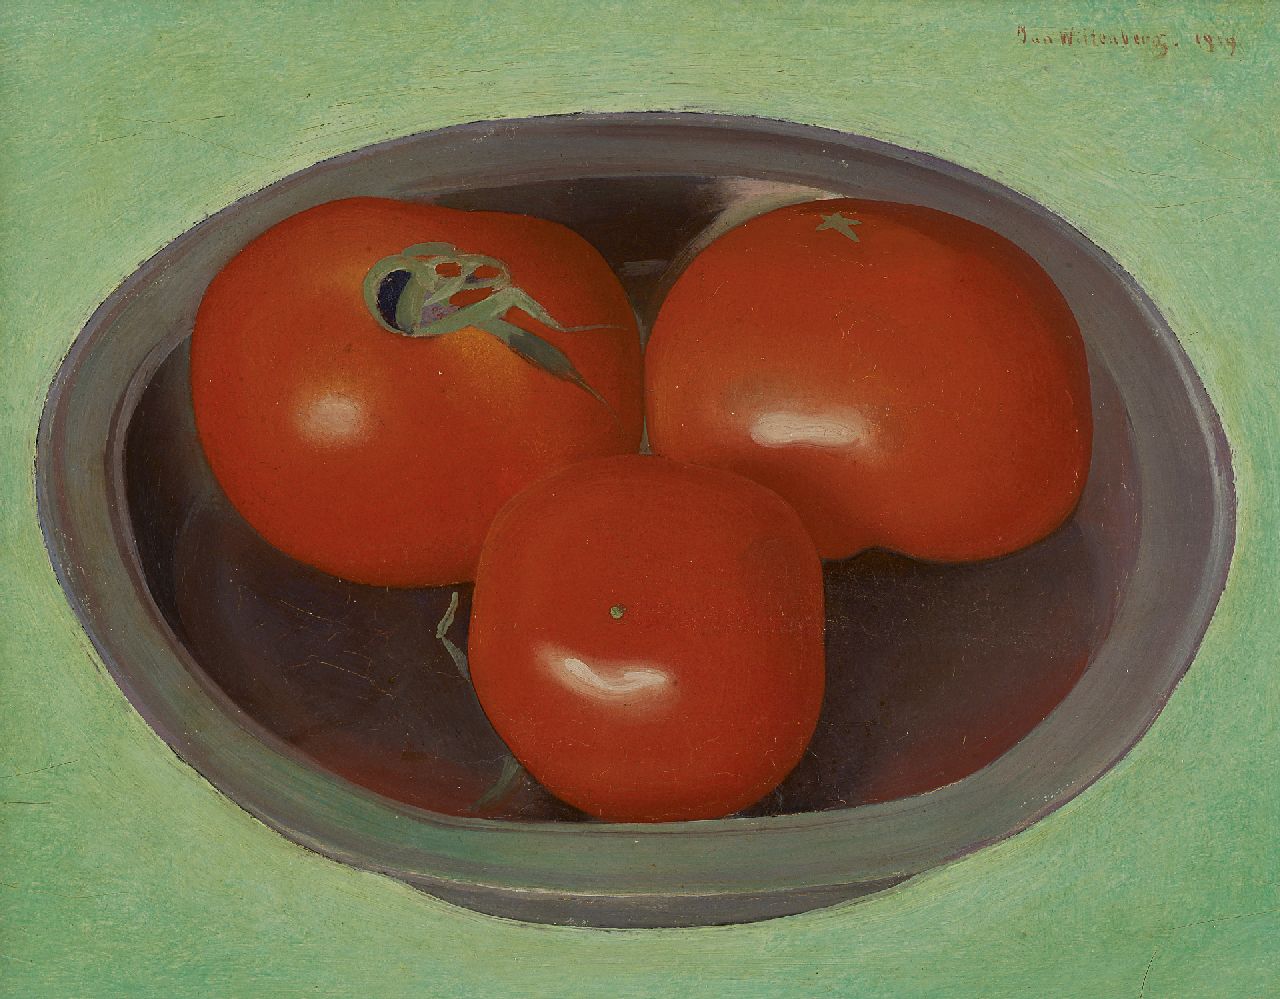 Wittenberg J.H.W.  | 'Jan' Hendrik Willem Wittenberg, Still life of three tomatoes on a plate, oil on canvas laid down on painter's board 17.5 x 23.2 cm, signed u.r. and dated 1919